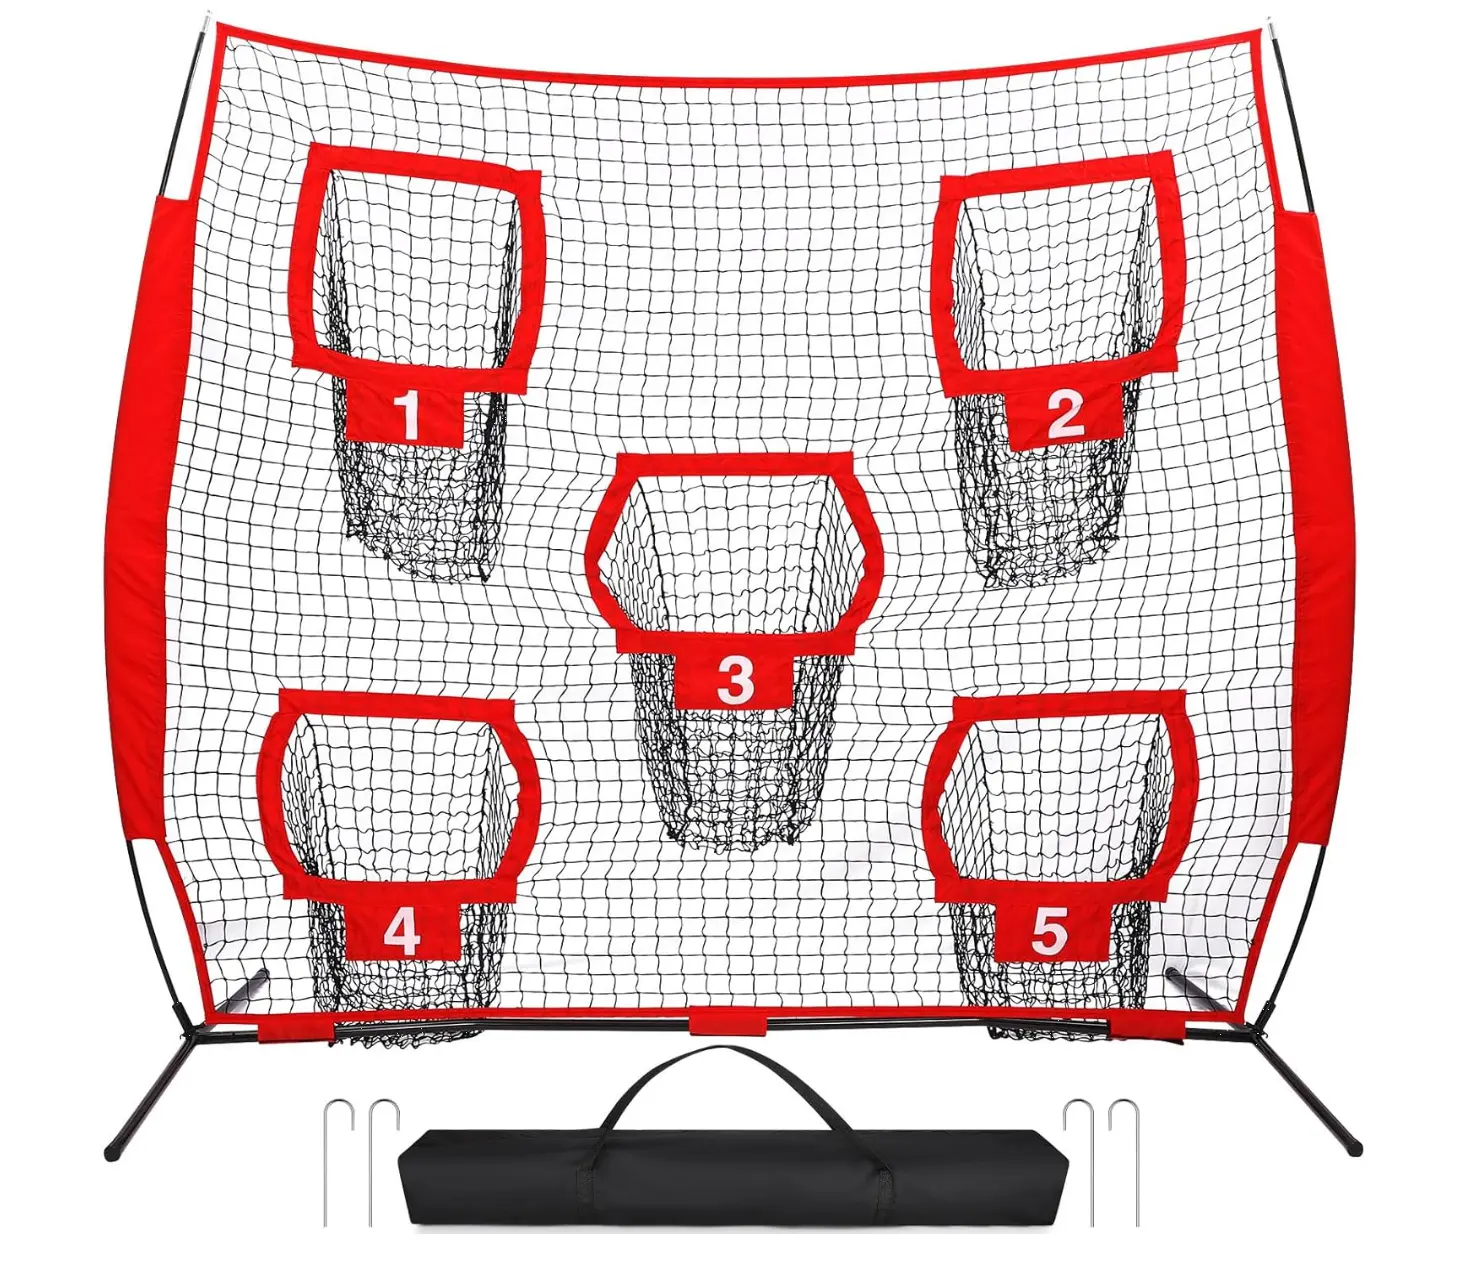 Training Throwing Target Practice with 5 Throwing Targets includes Carry Bag 7 ftx 7ft Football Trainer Throwing Net